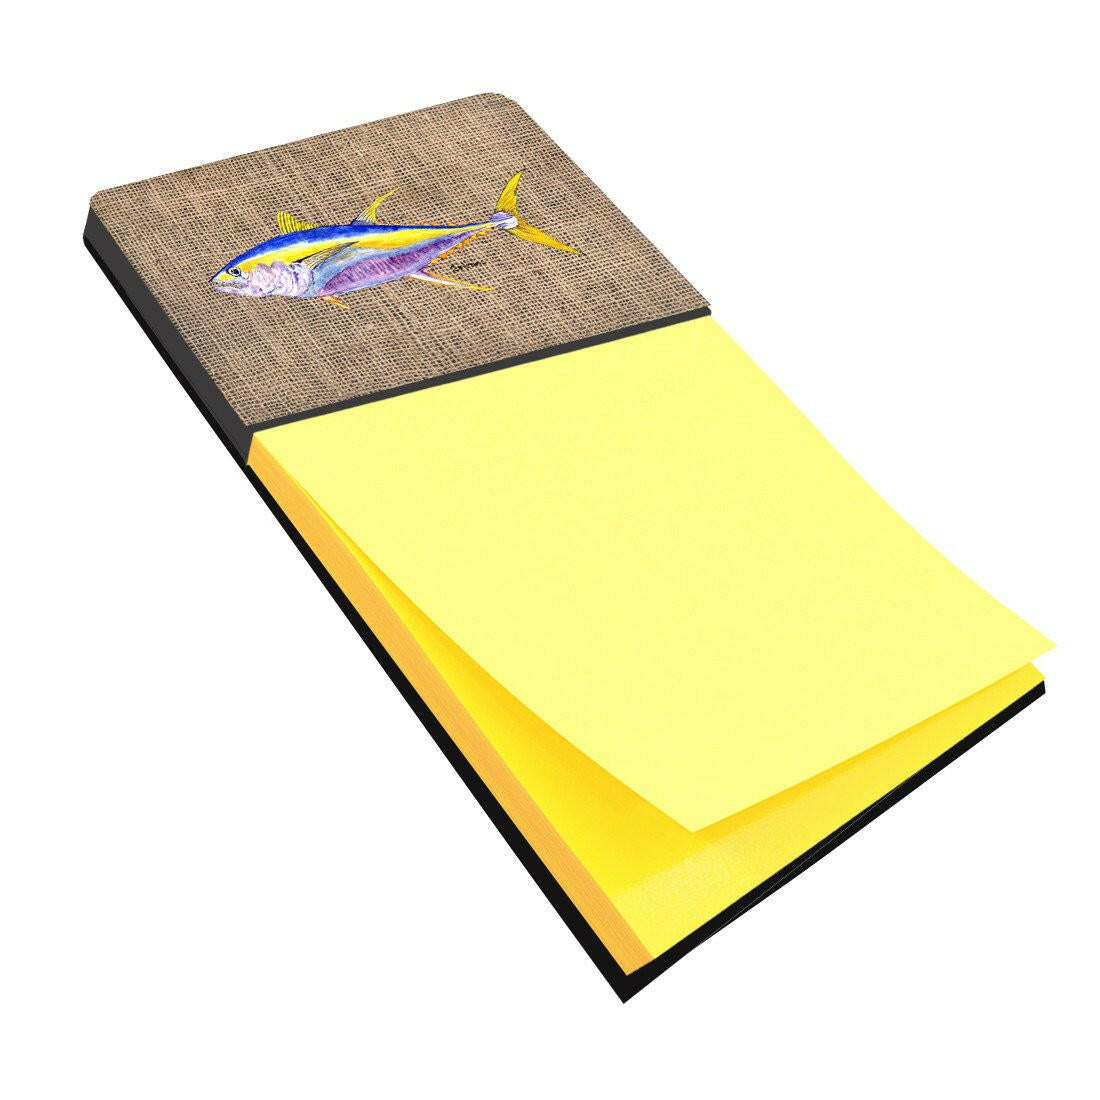 Fish - Tuna Refiillable Sticky Note Holder or Postit Note Dispenser 8771SN by Caroline's Treasures